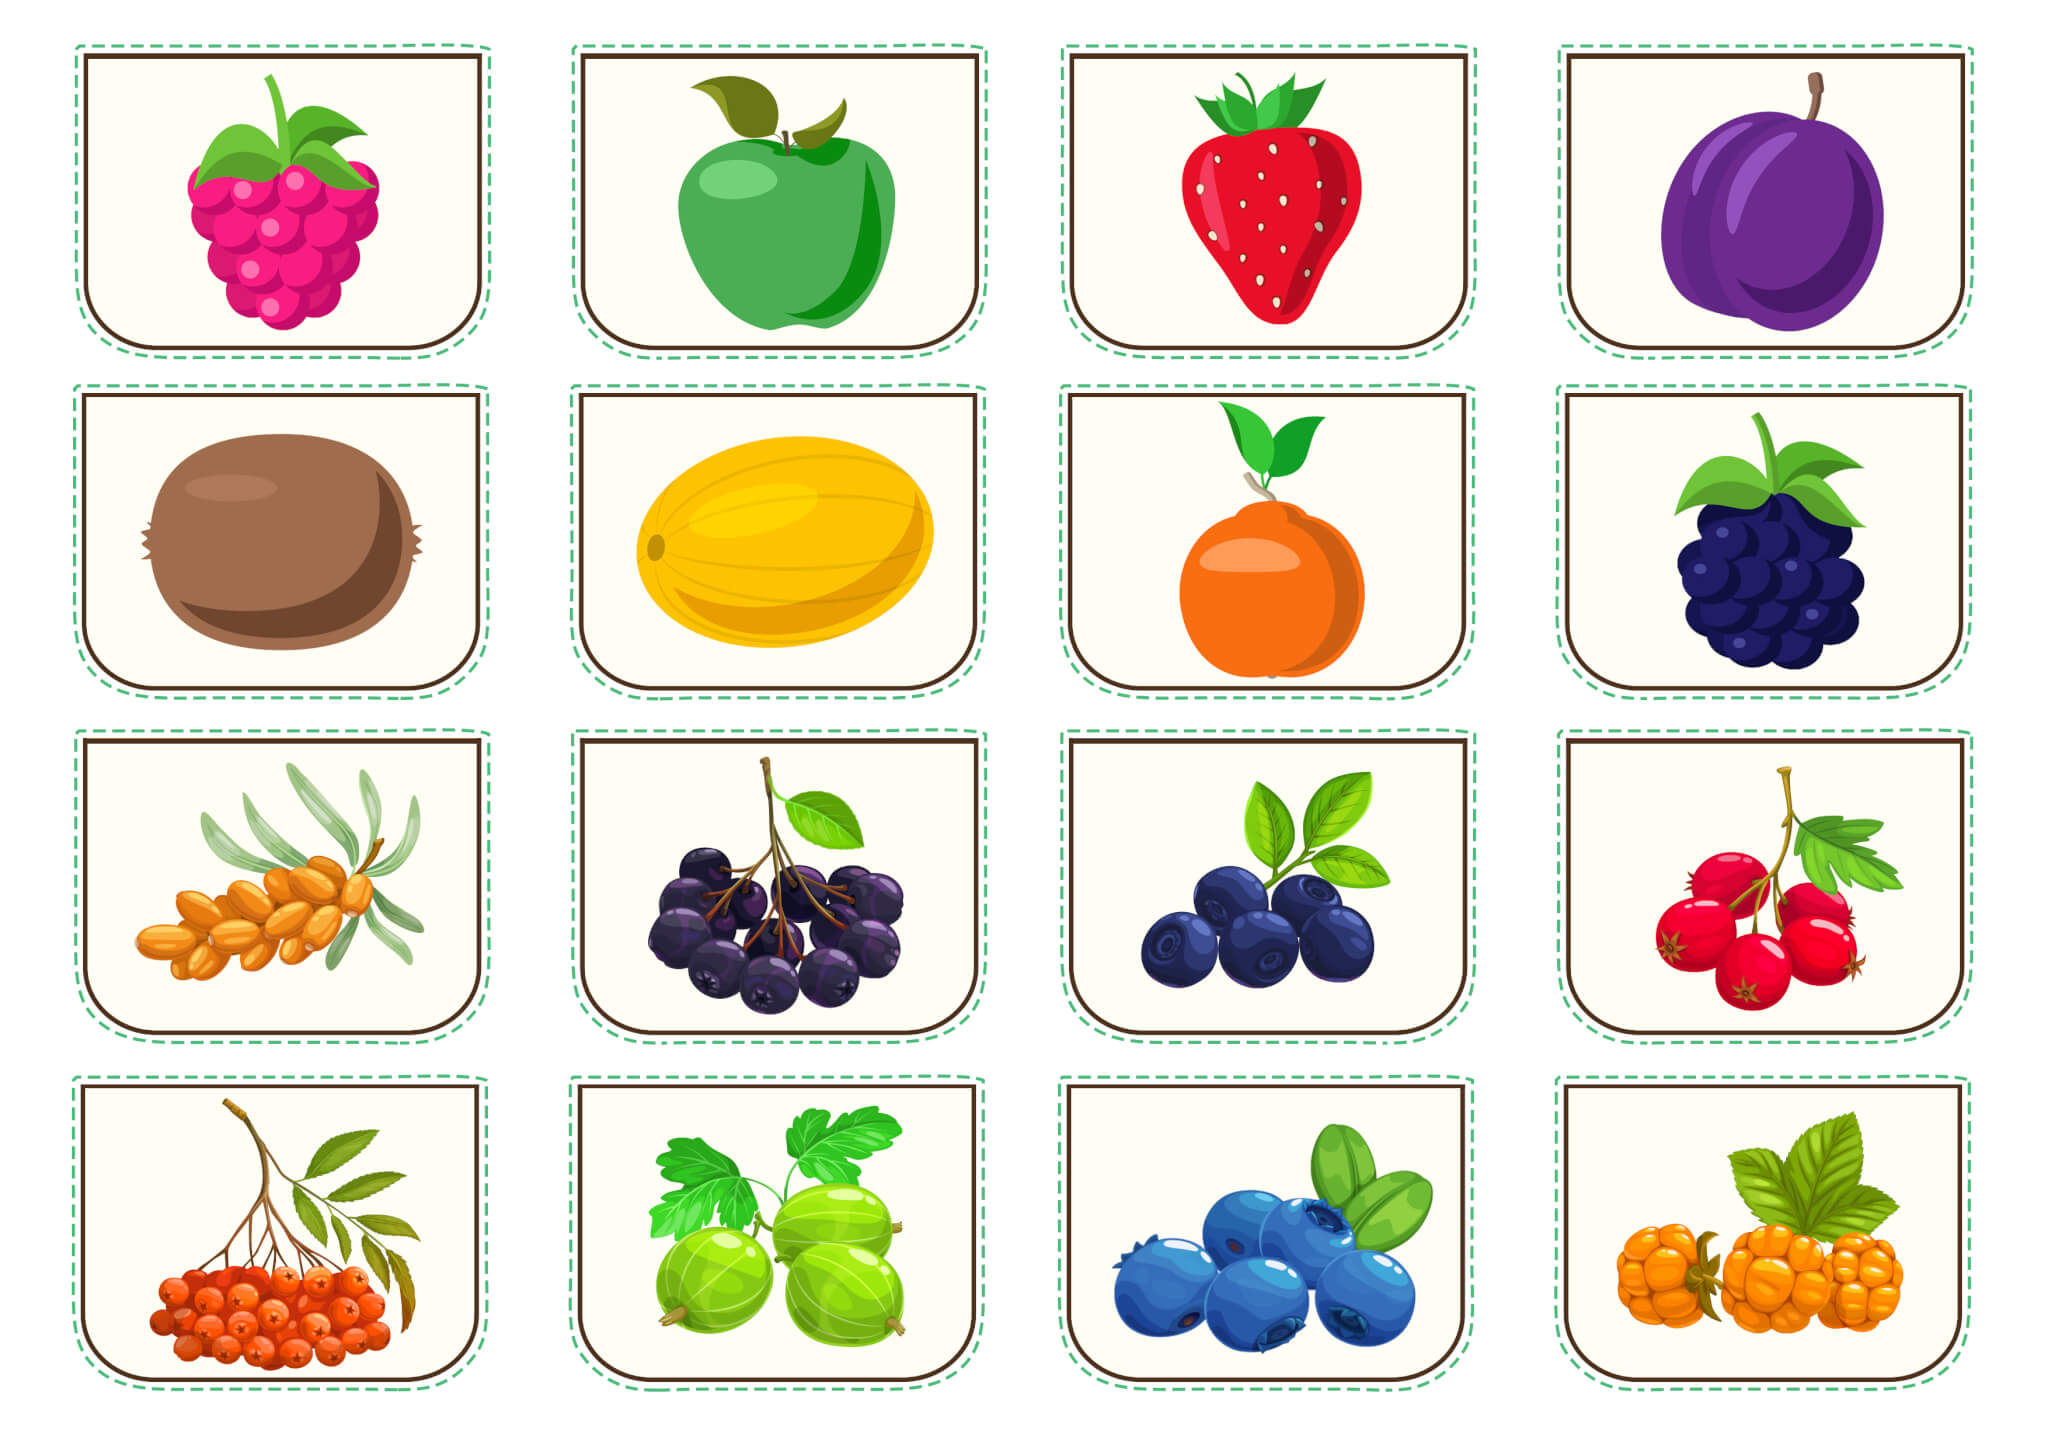 Activity sheet «The colors of fruits and berries» - Image 4